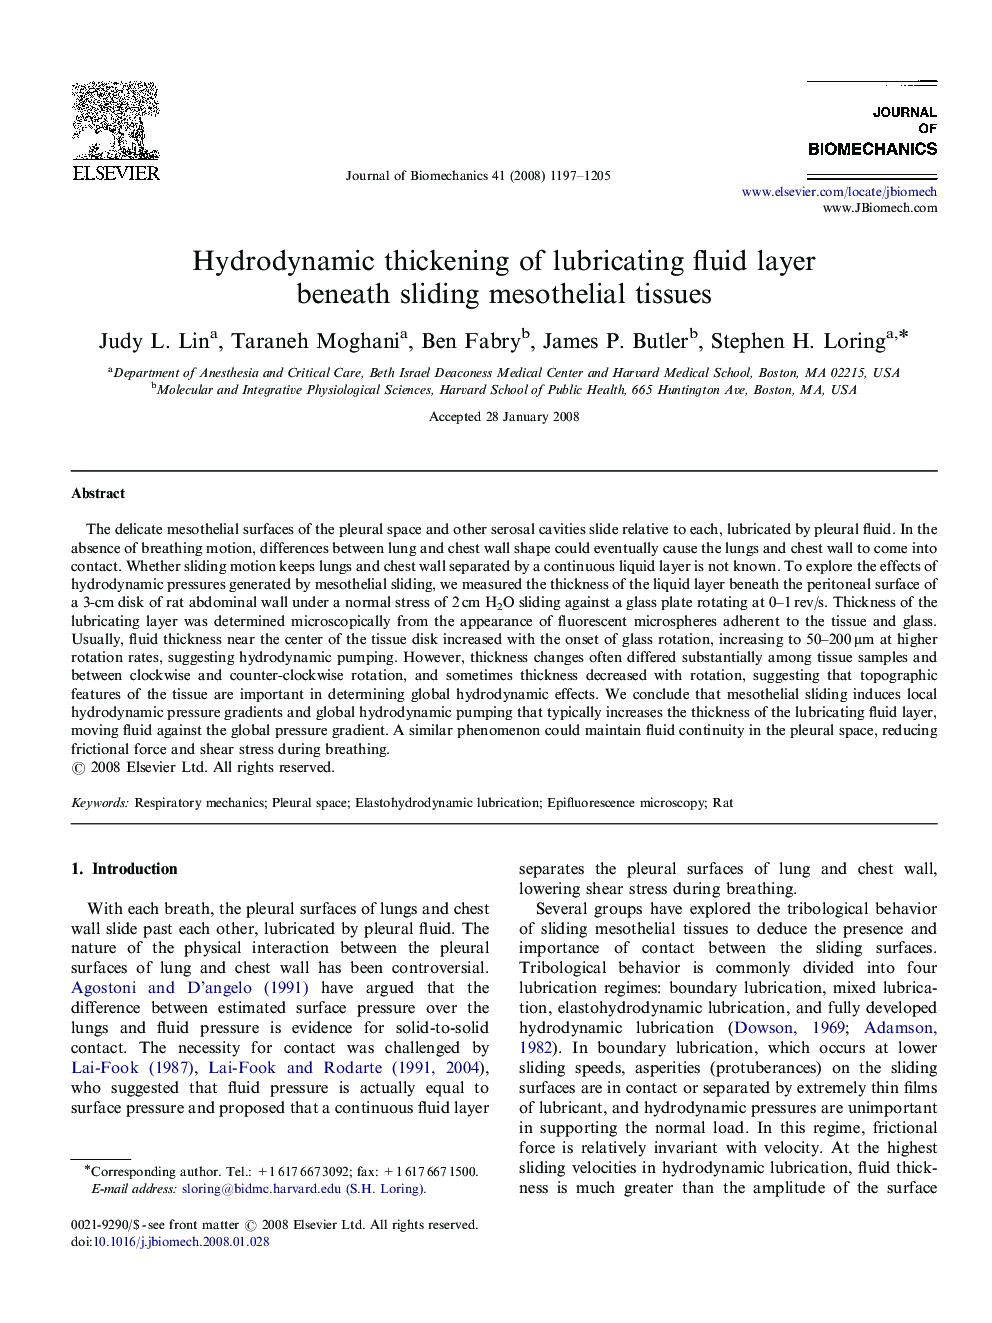 Hydrodynamic thickening of lubricating fluid layer beneath sliding mesothelial tissues